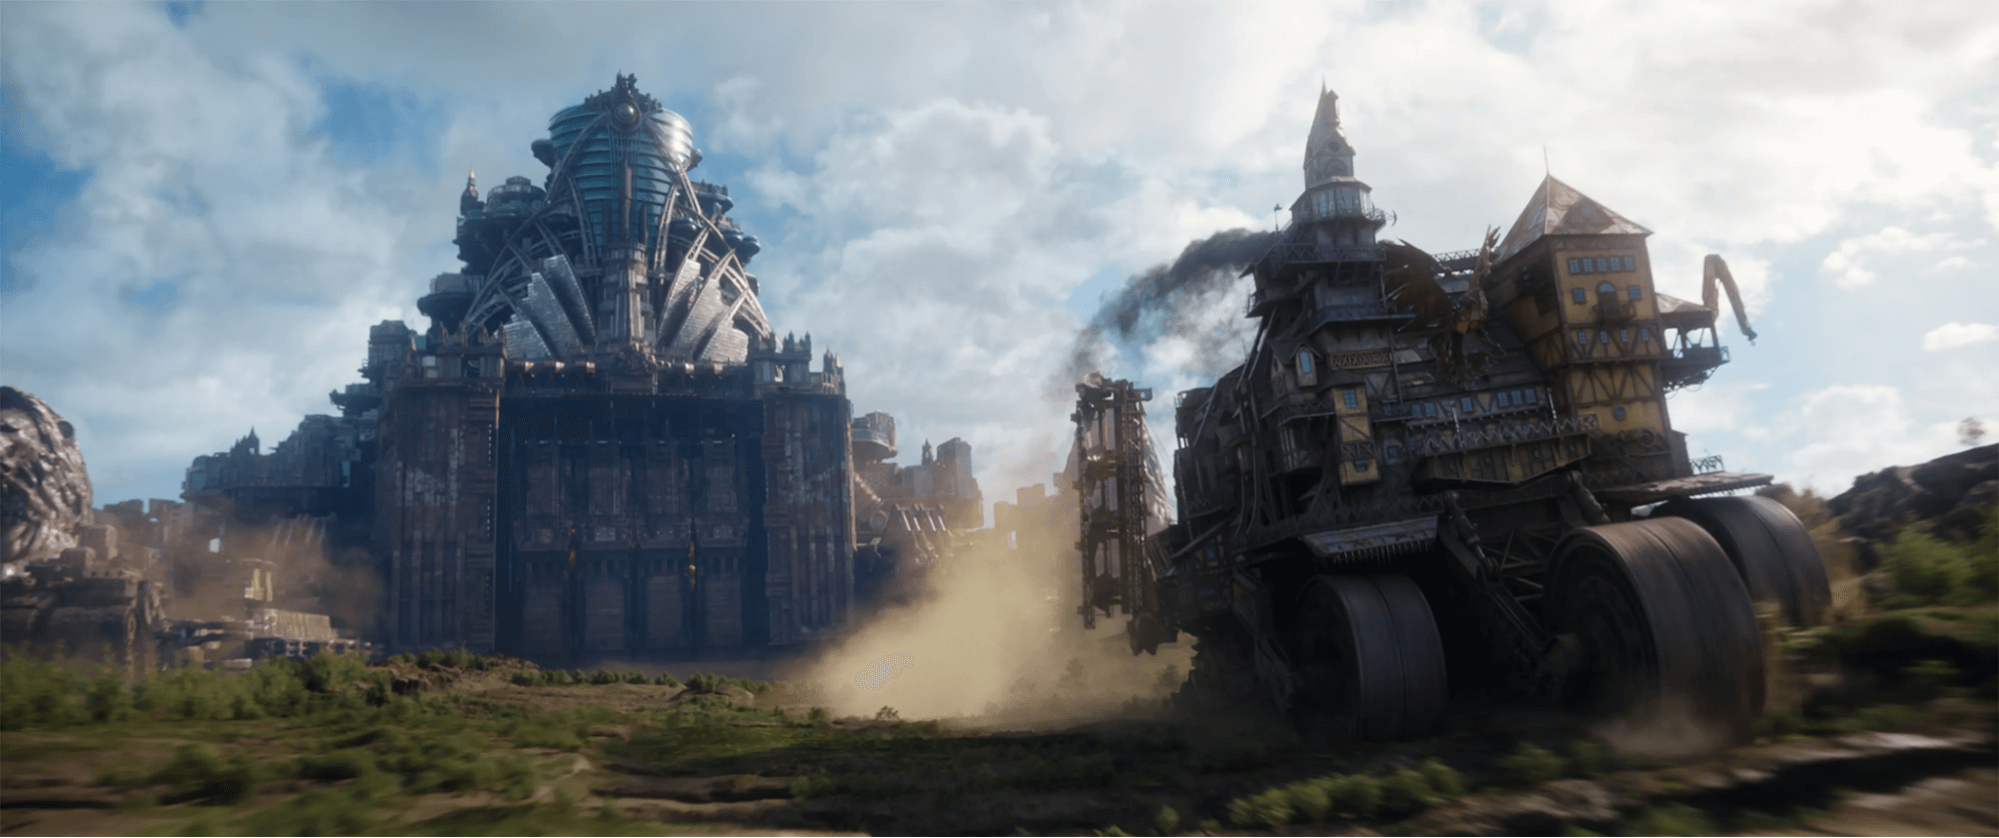 Steampunk Meaning in Cinema • Steampunk Movies Mortal Engines